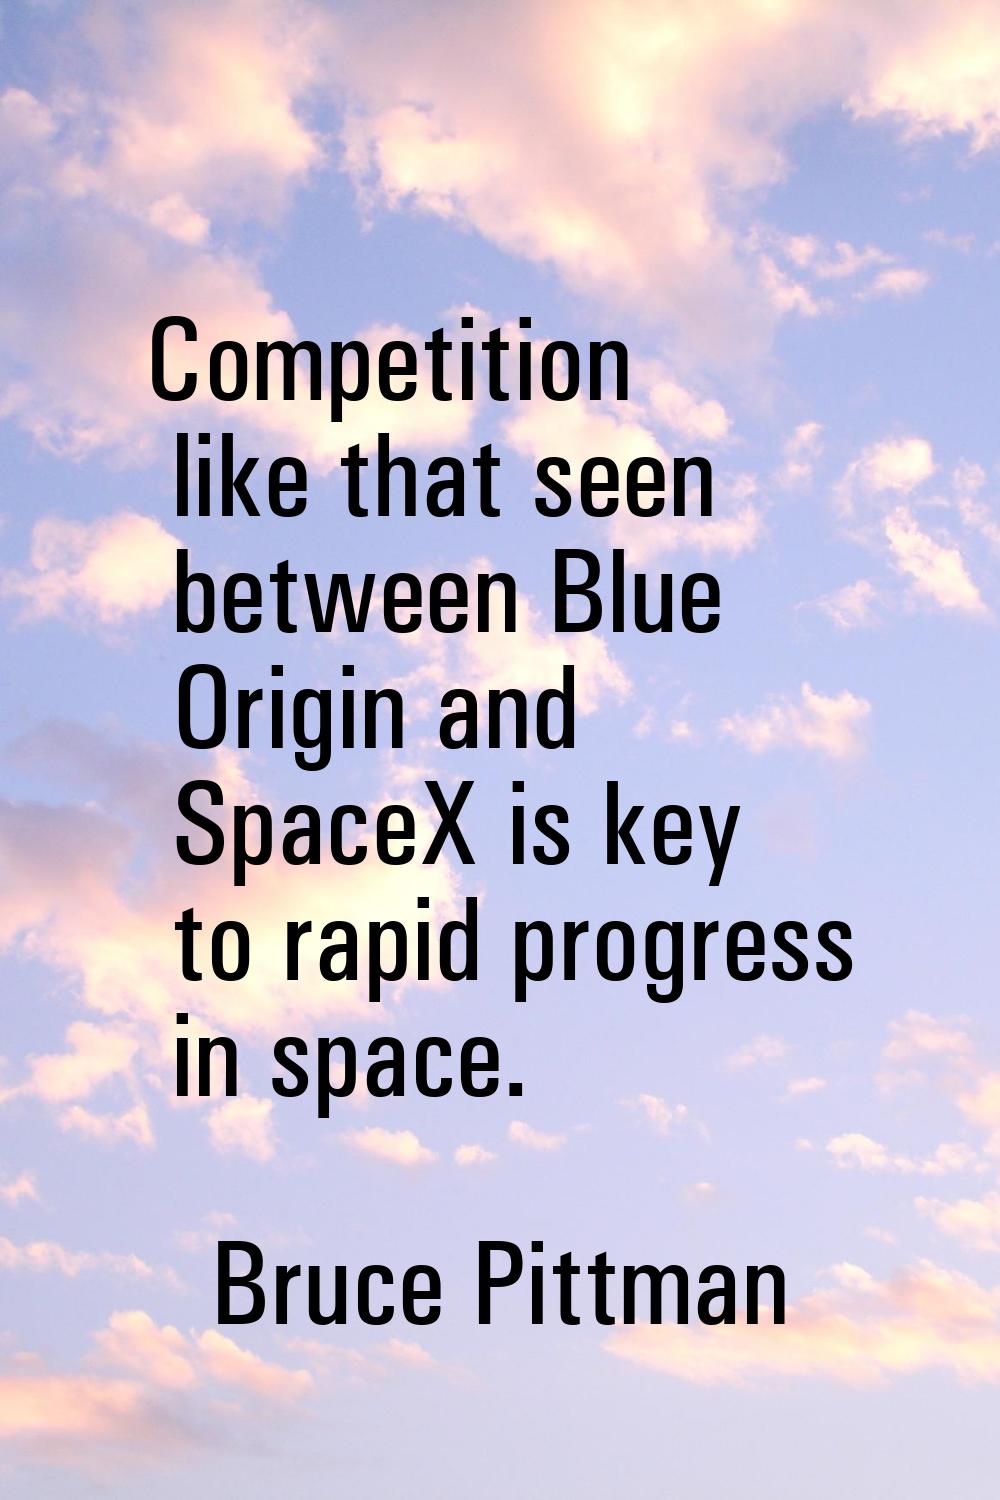 Competition like that seen between Blue Origin and SpaceX is key to rapid progress in space.